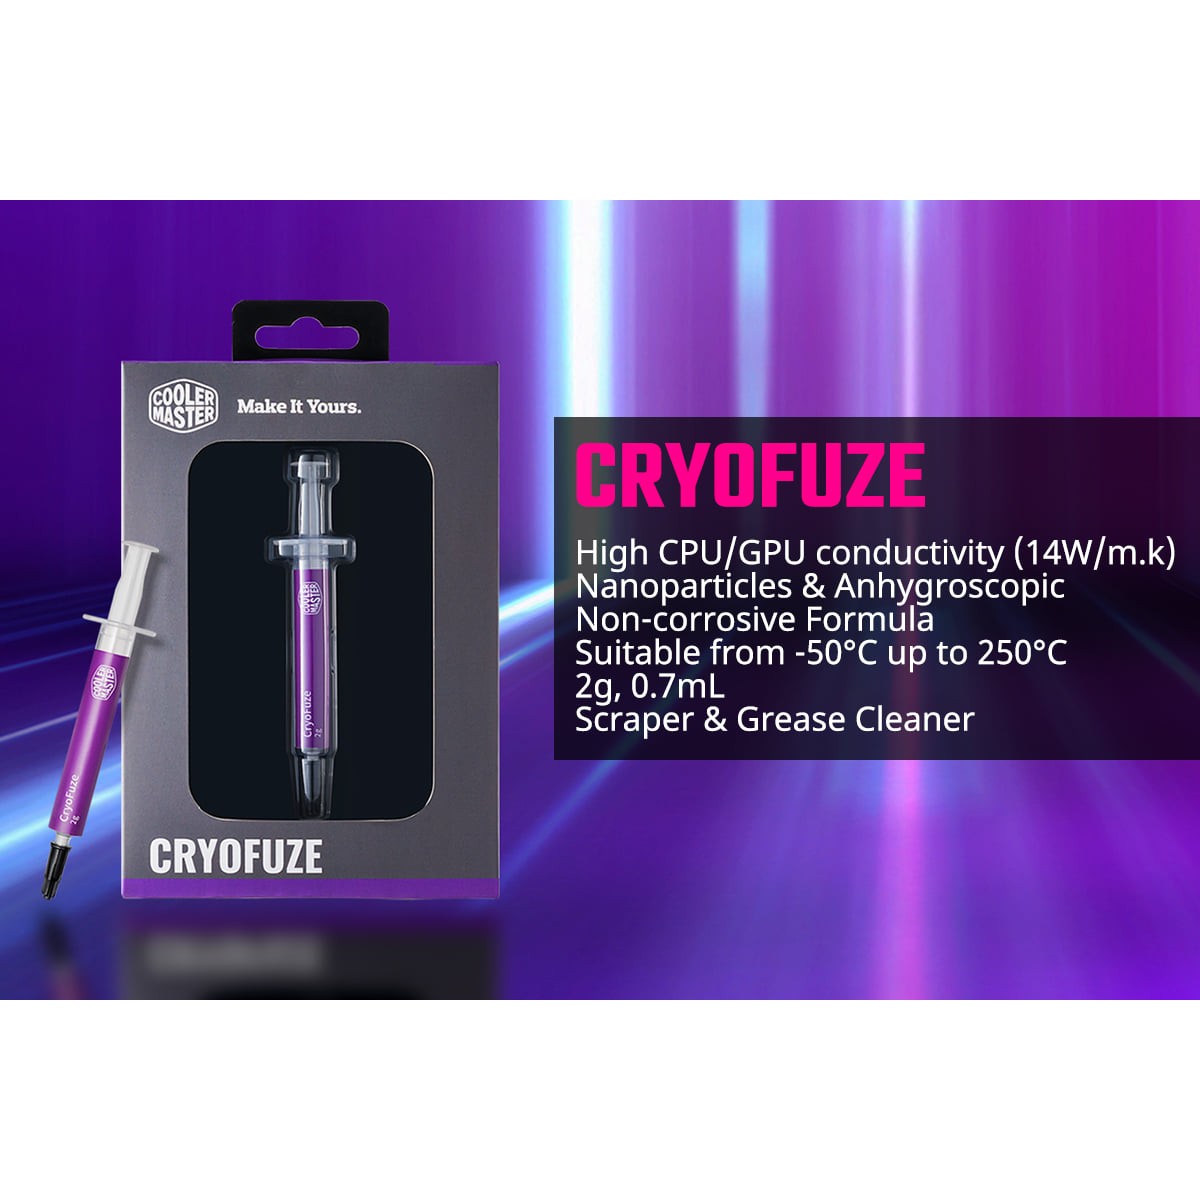 Cooler Master CRYOFUZE 14 (W/m.K) Thermal Grease                          
                                                        Cooler Master